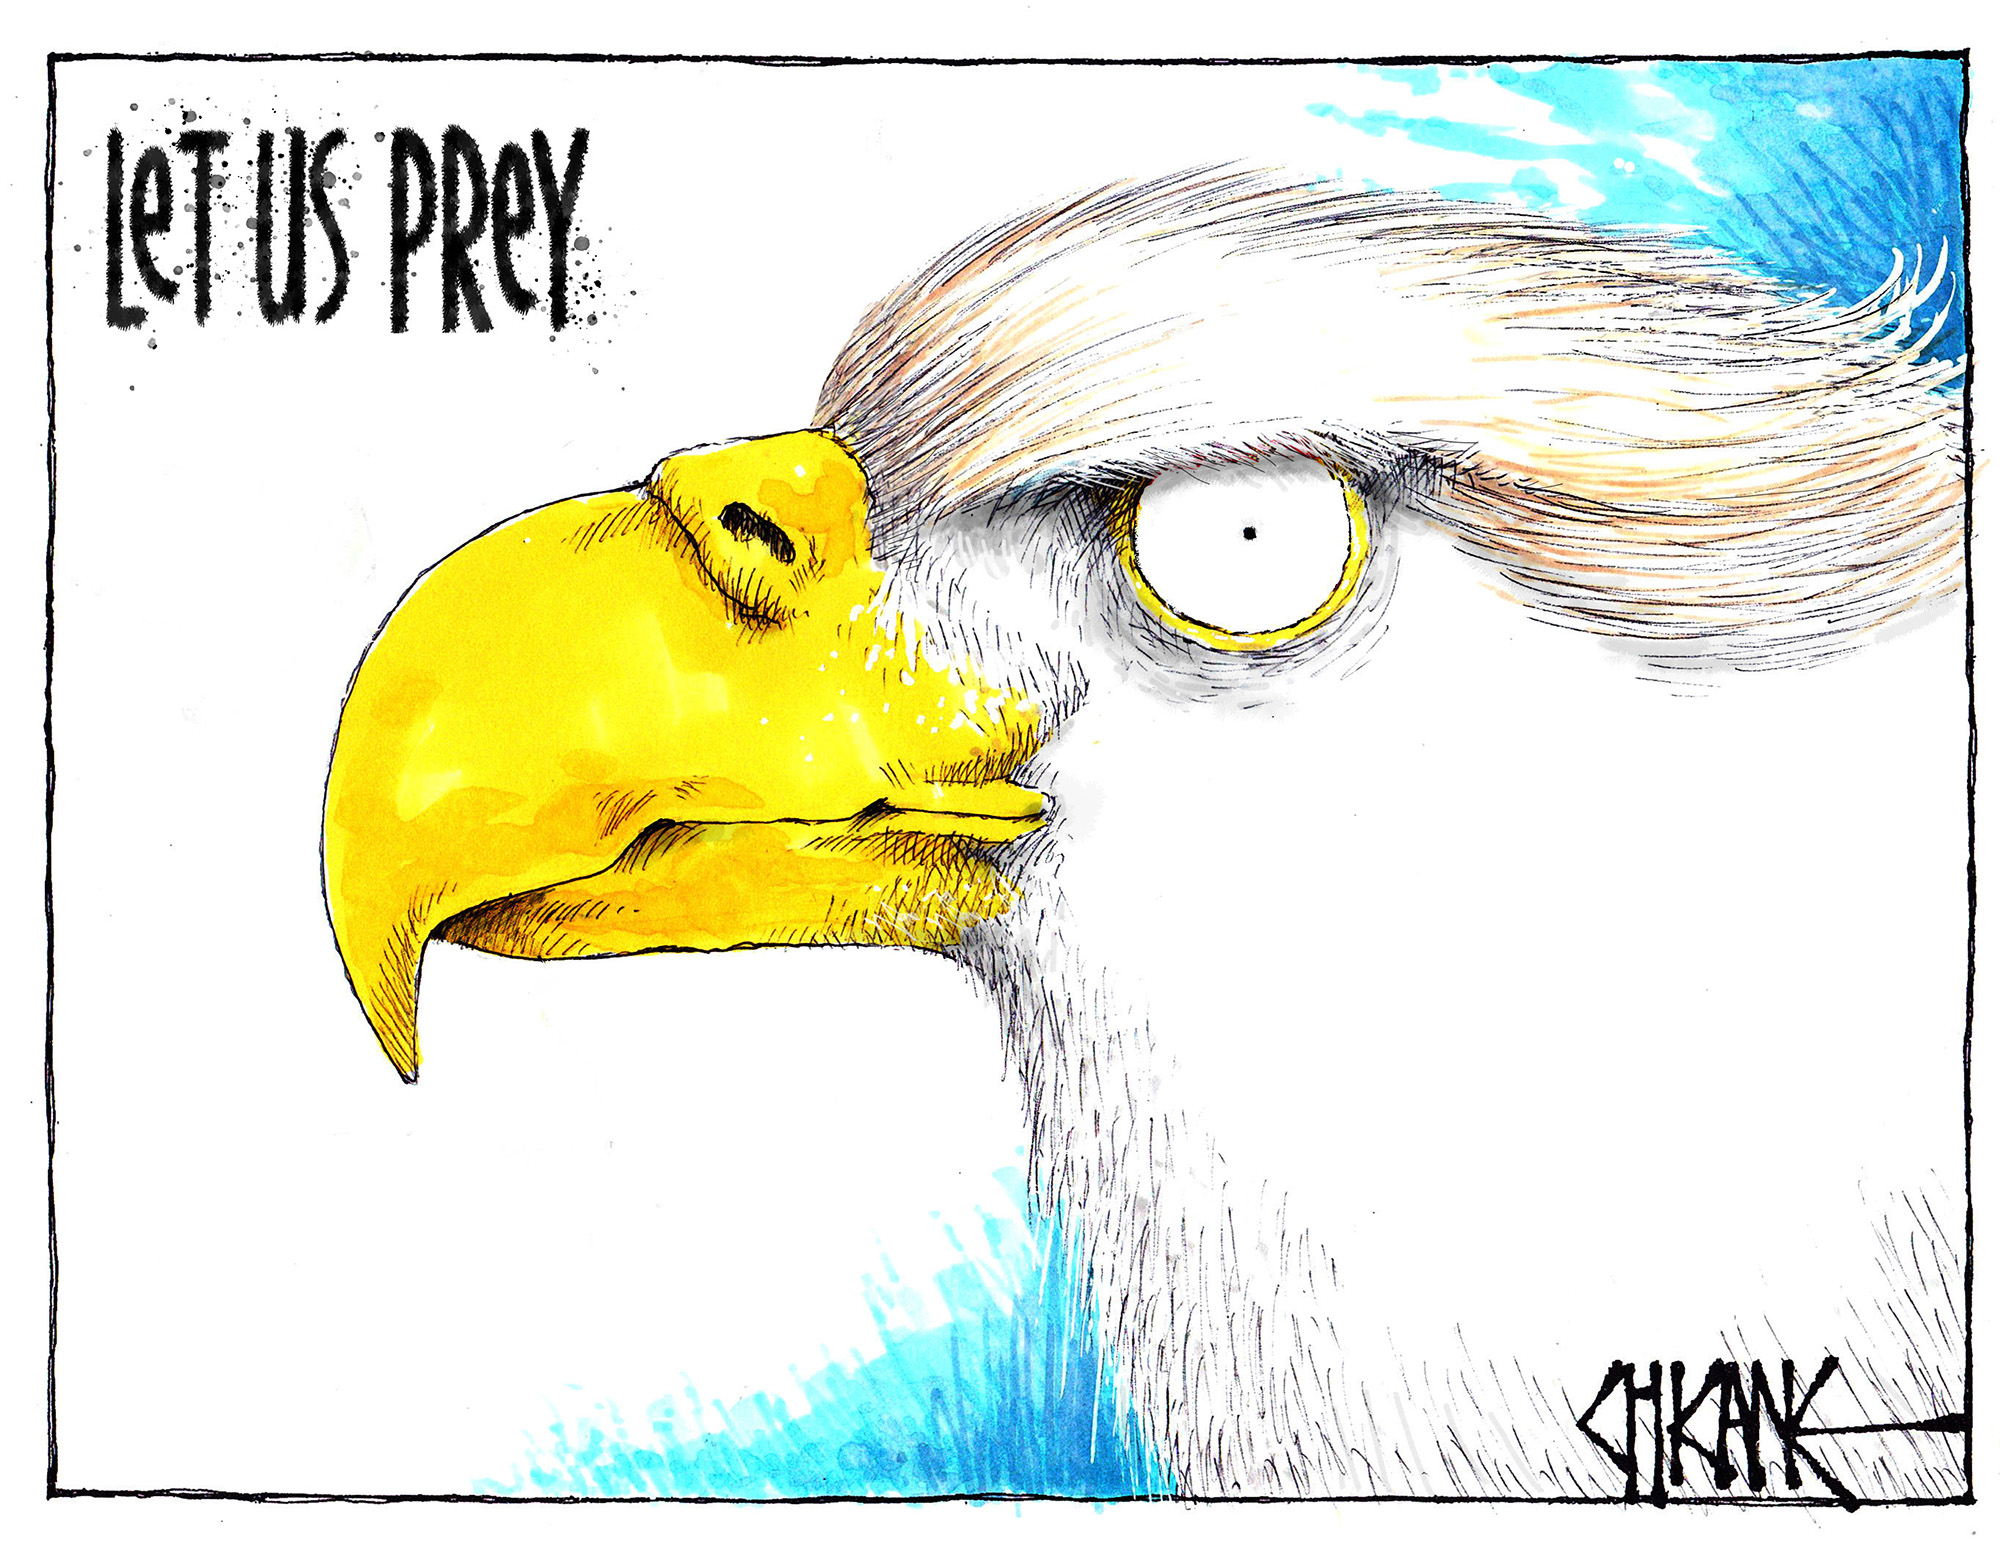 Donald Trump as an eagle with the text "Let us Prey". Cartoon by Chicane.